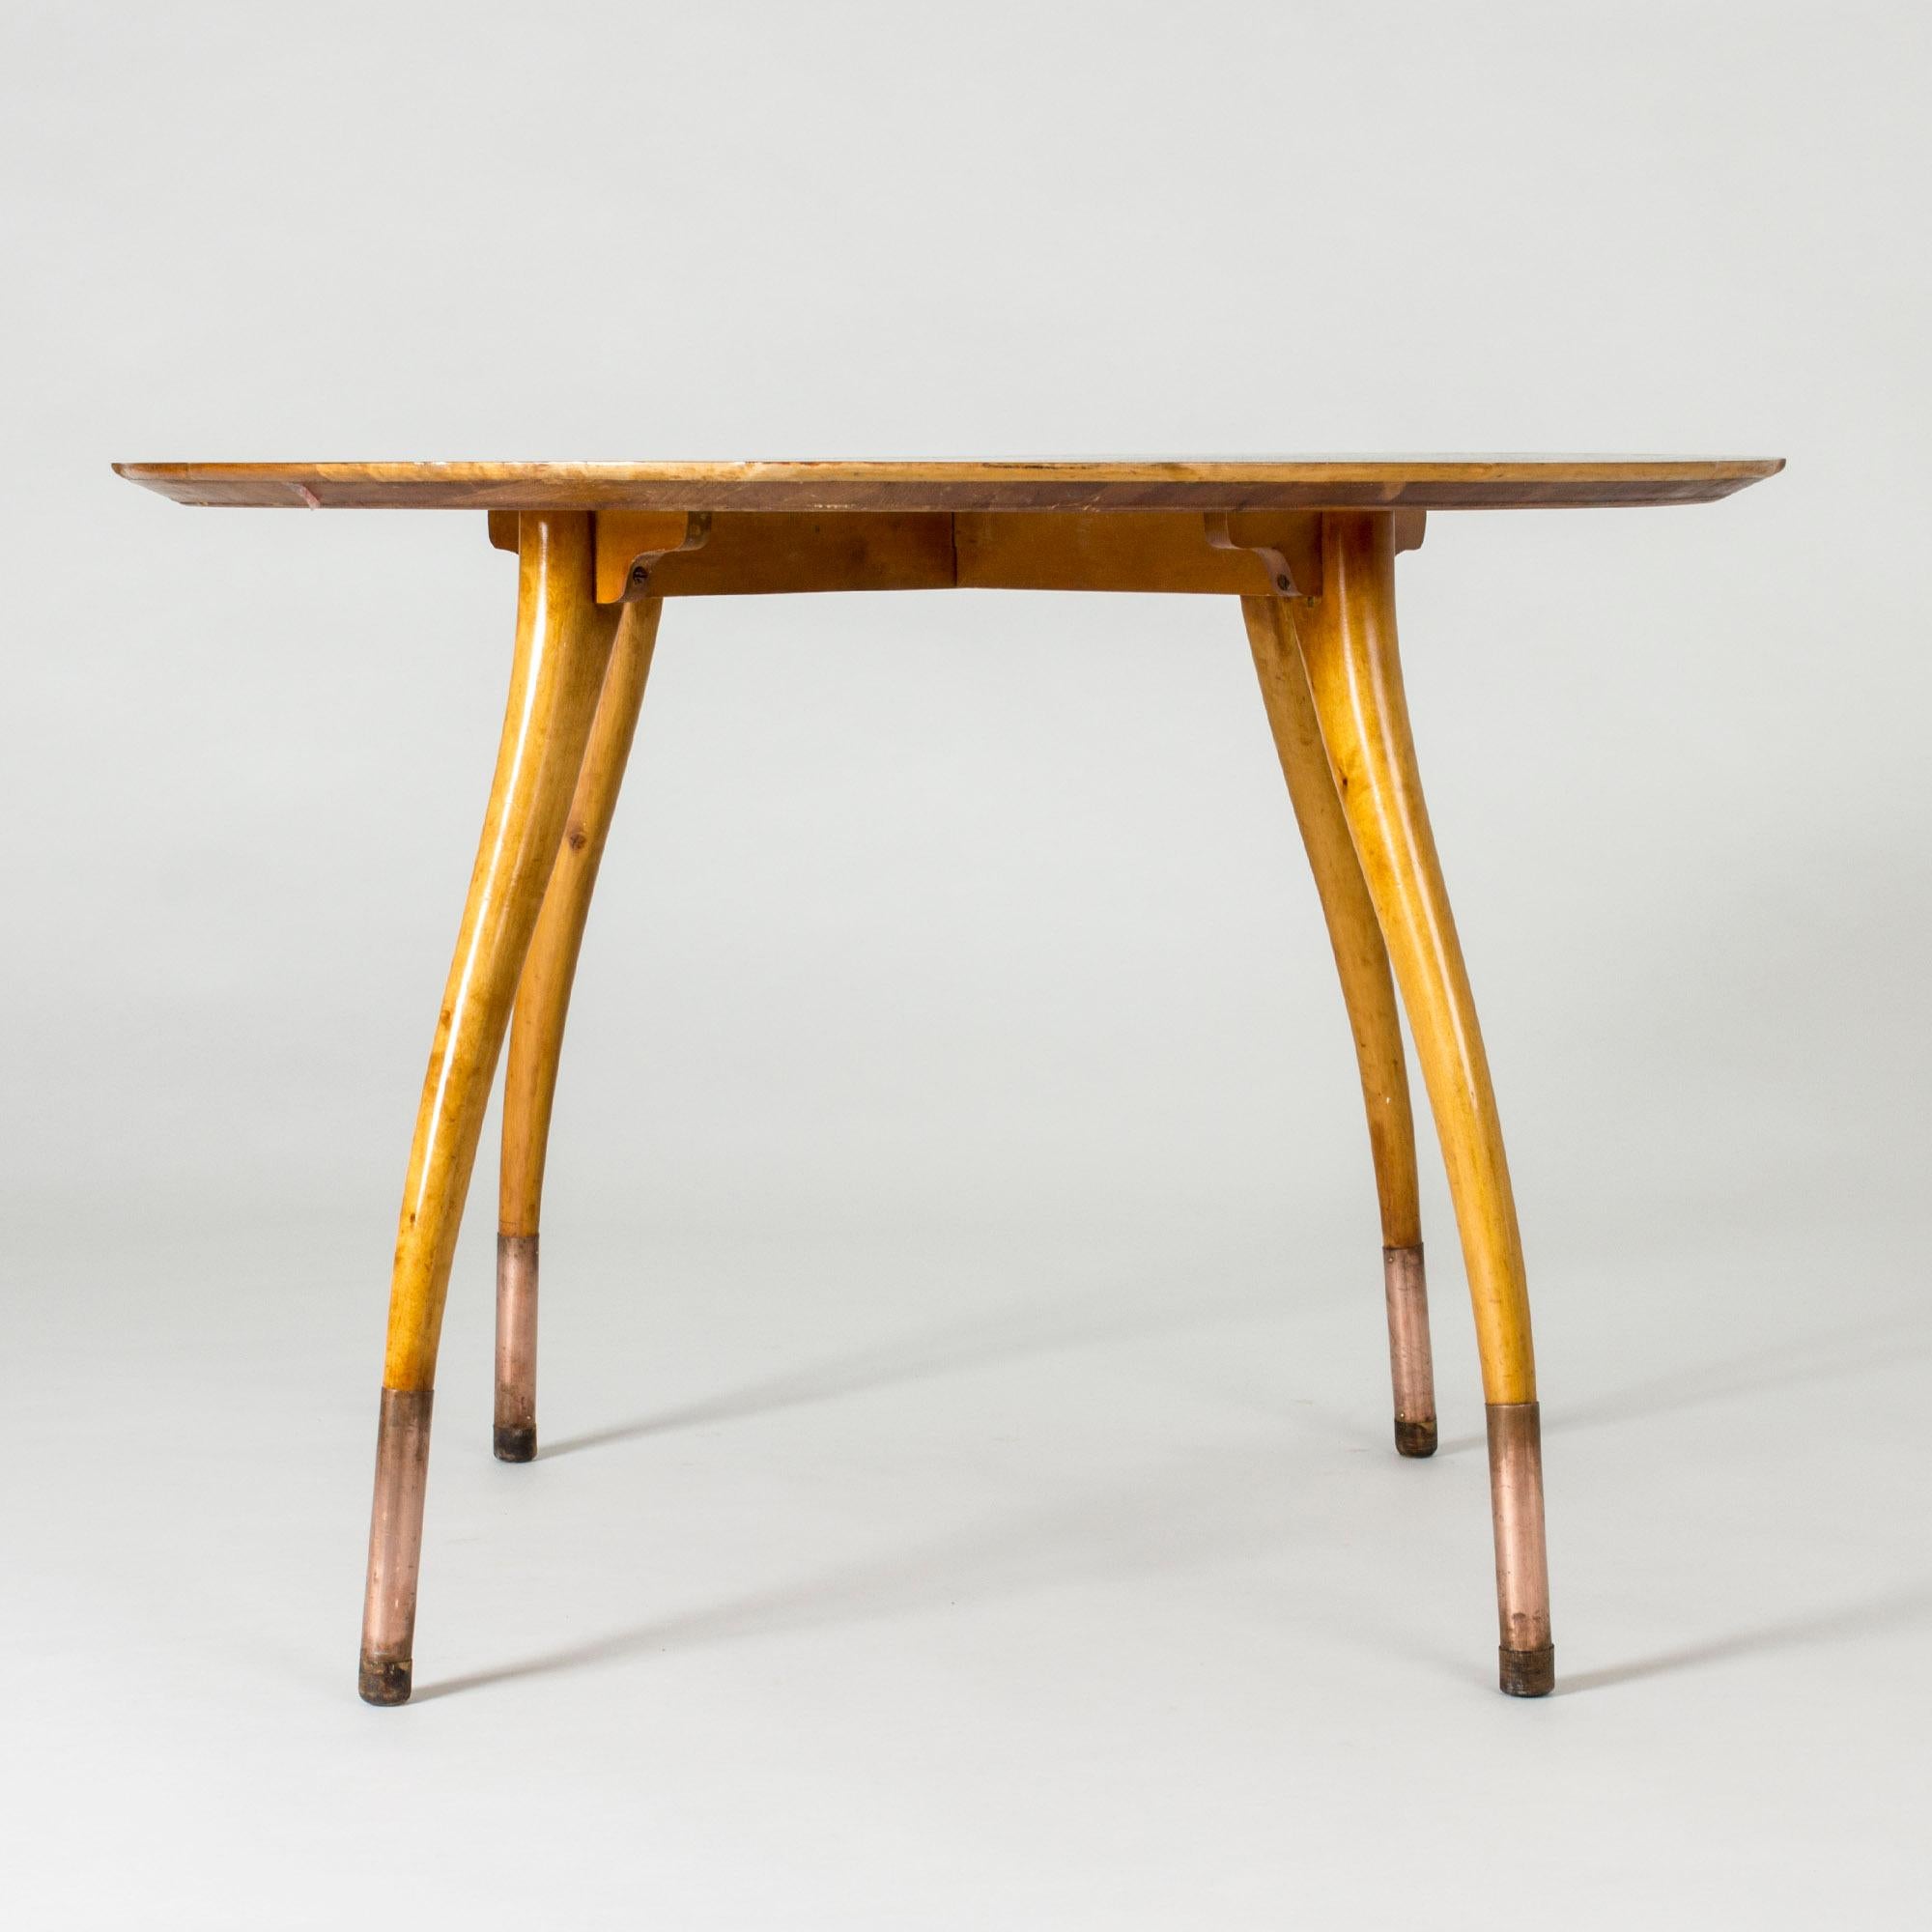 Beautiful Swedish modern occasional or playing table, made with a stunning root tabletop. Elegantly curved beech legs, copper-clad at the base.